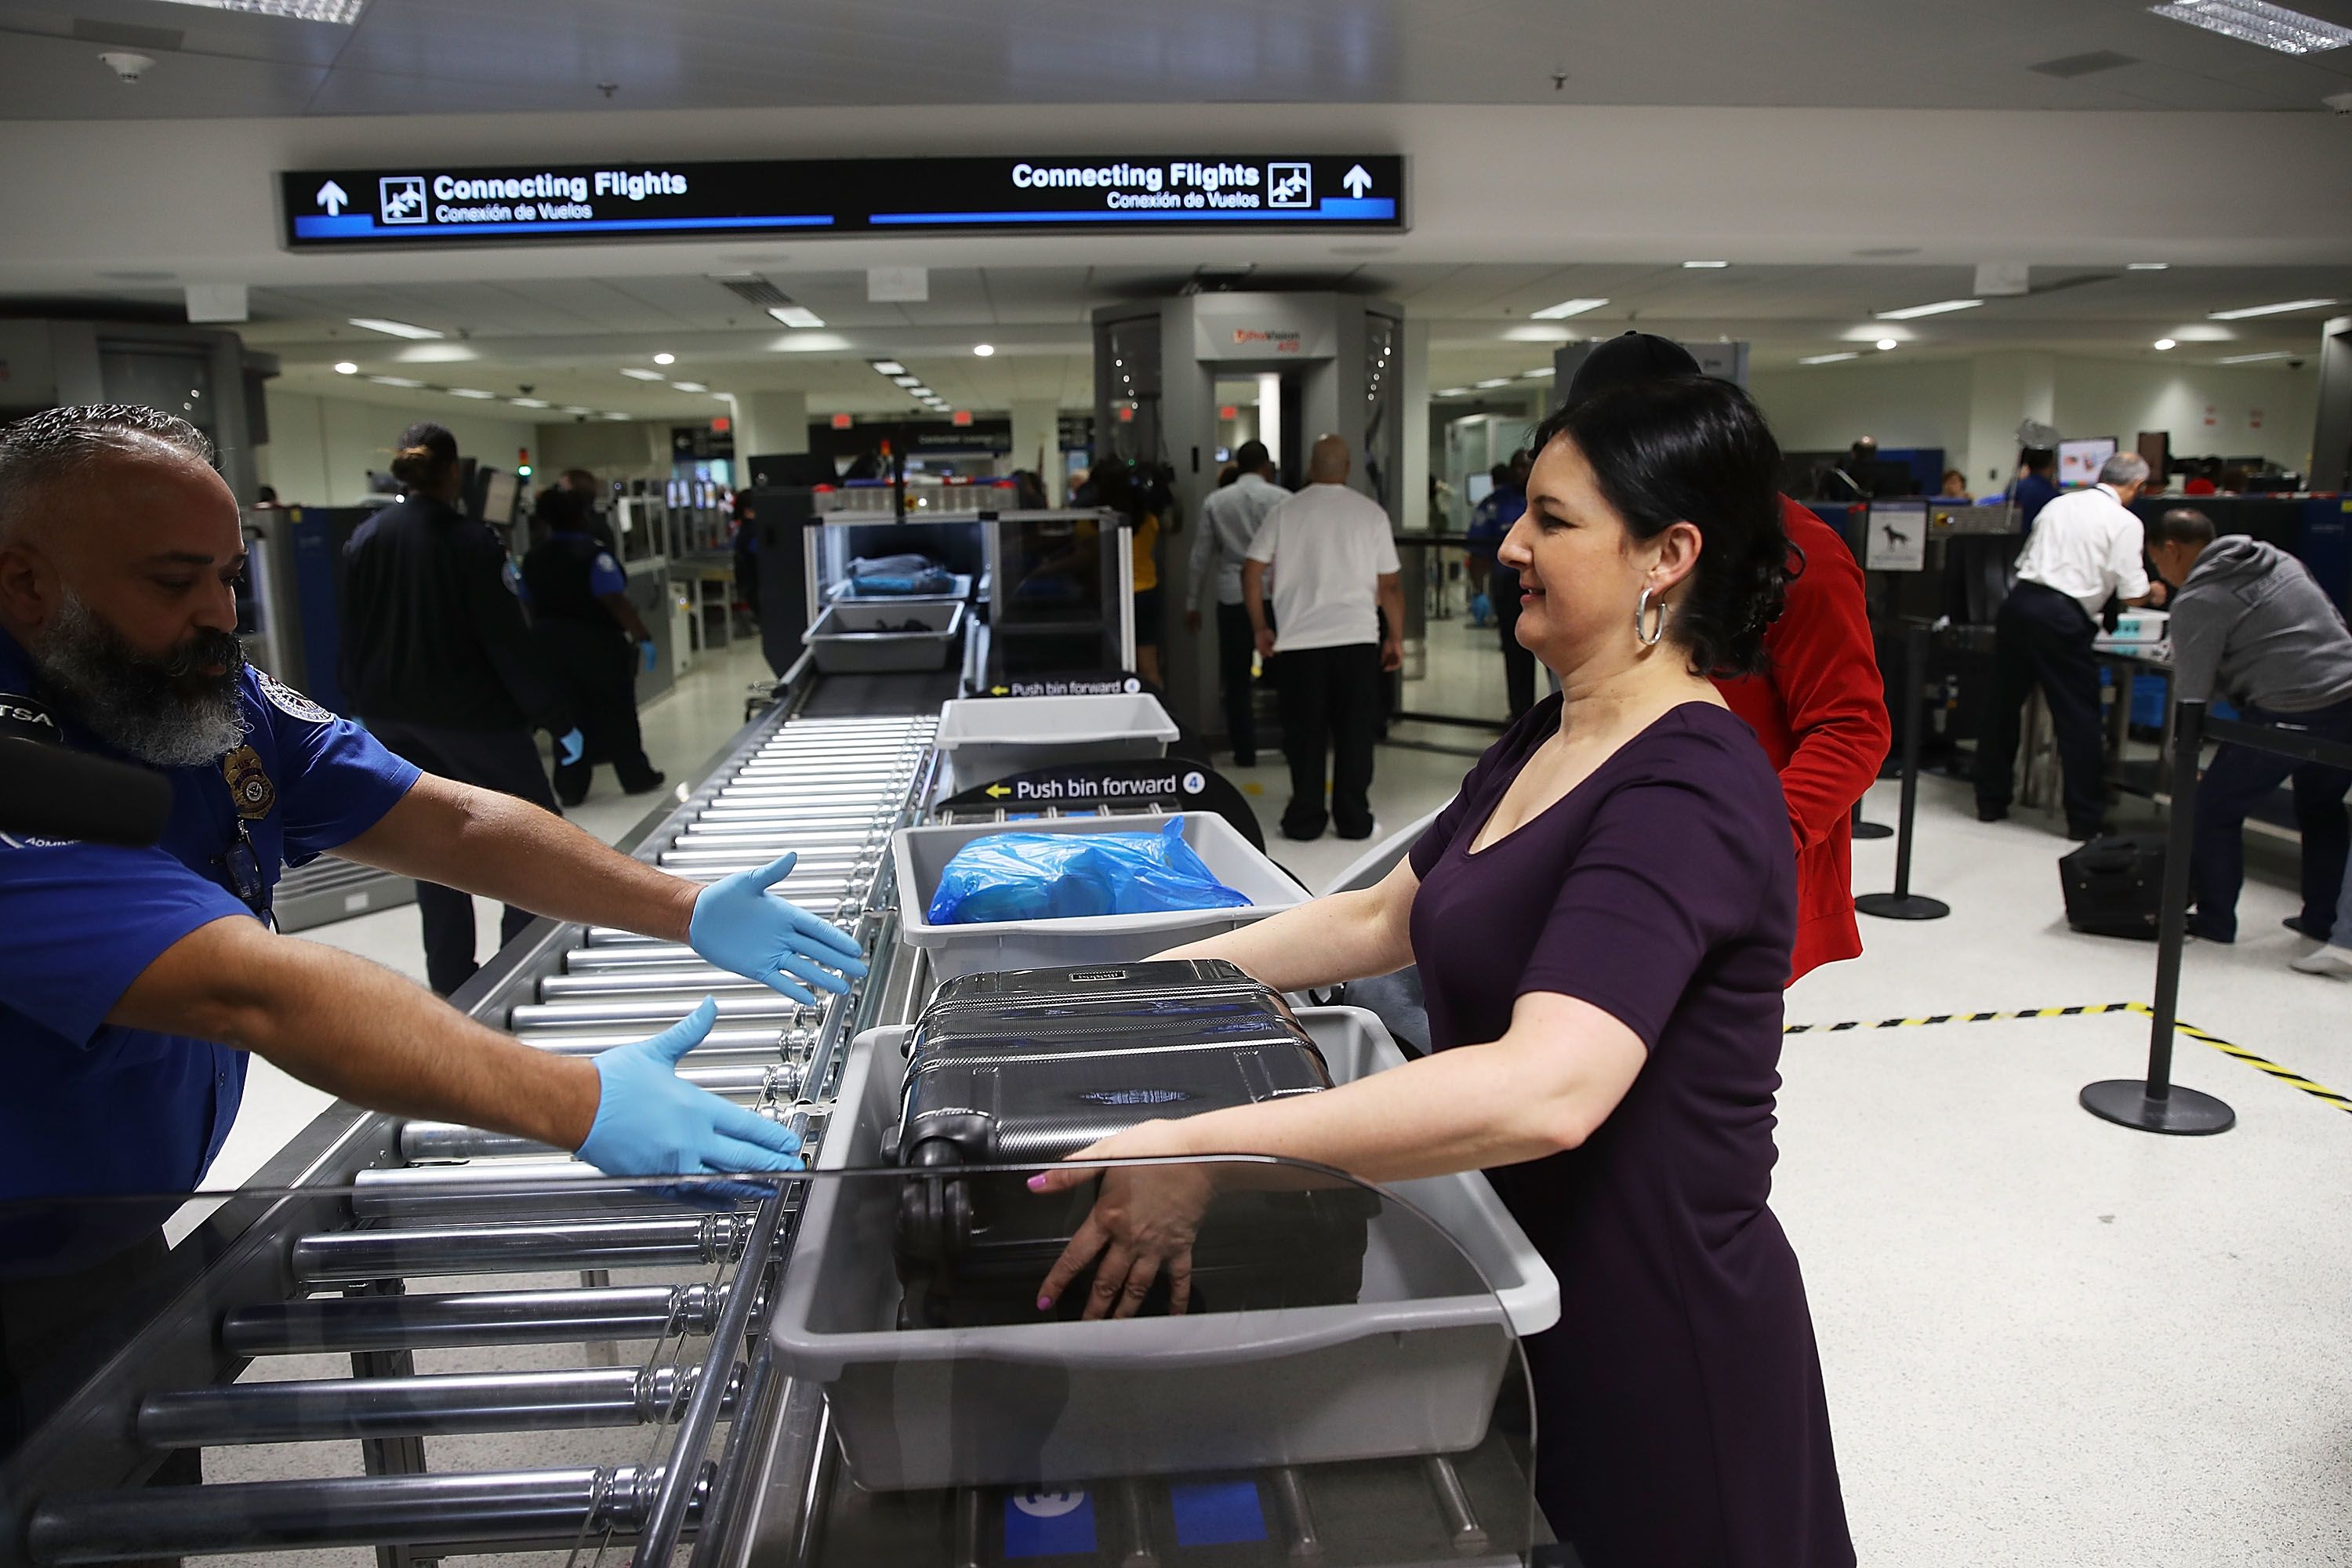 Travelers left close to $1 million at TSA airport checkpoints last year